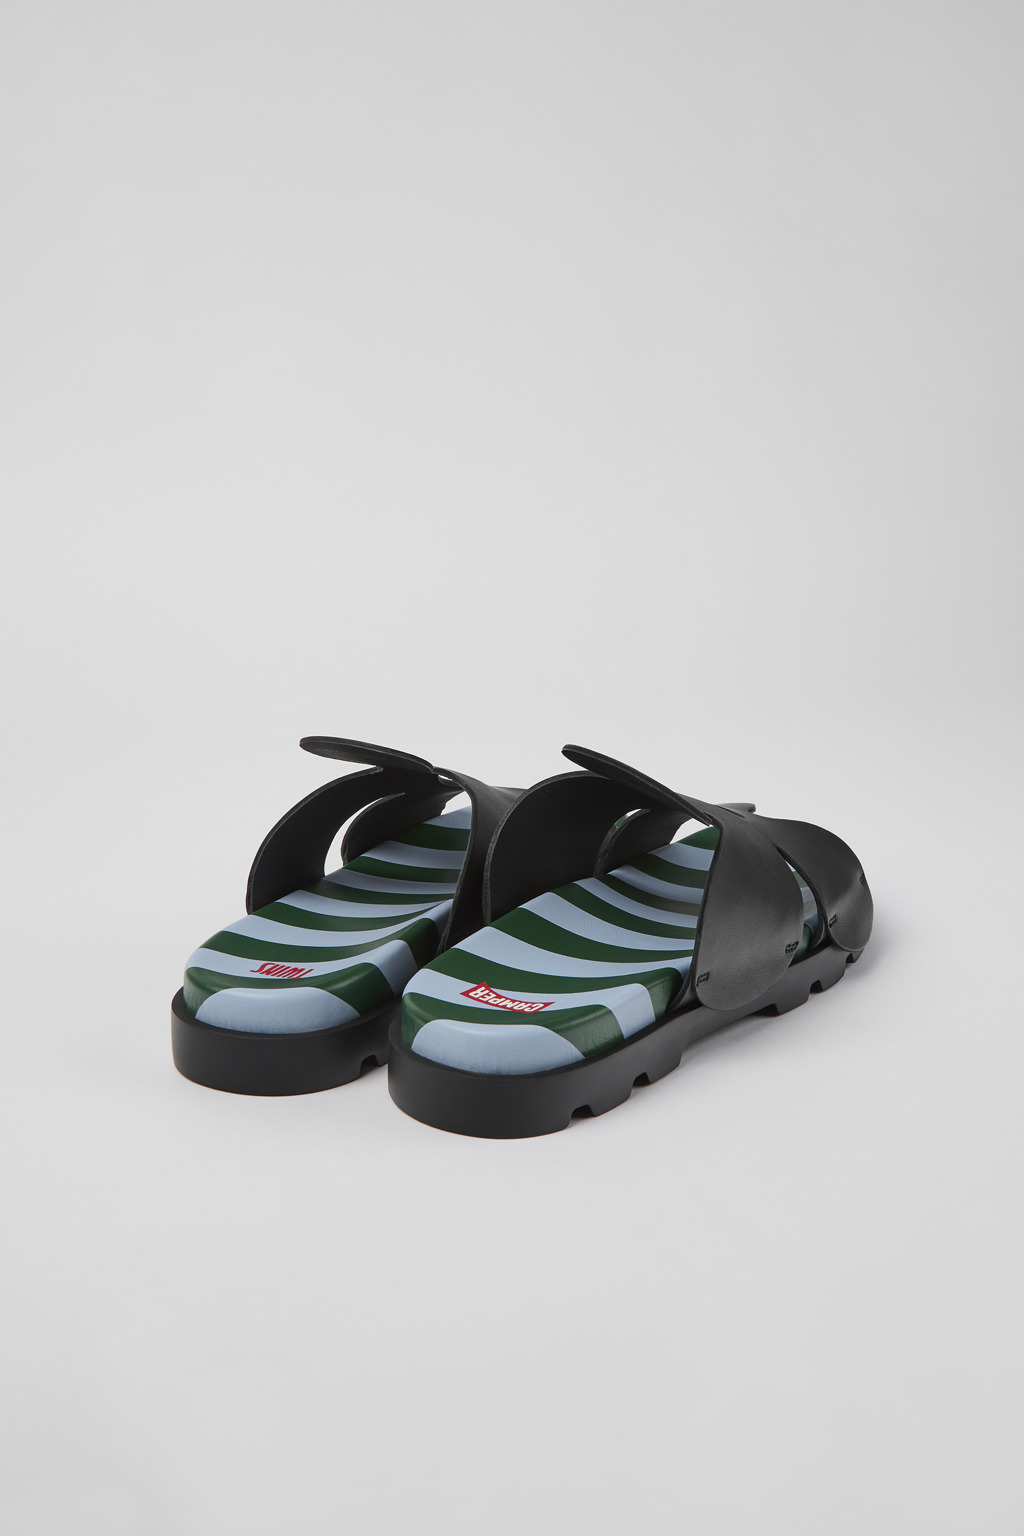 Twins Black Sandals for Men - Fall/Winter collection - Camper USA